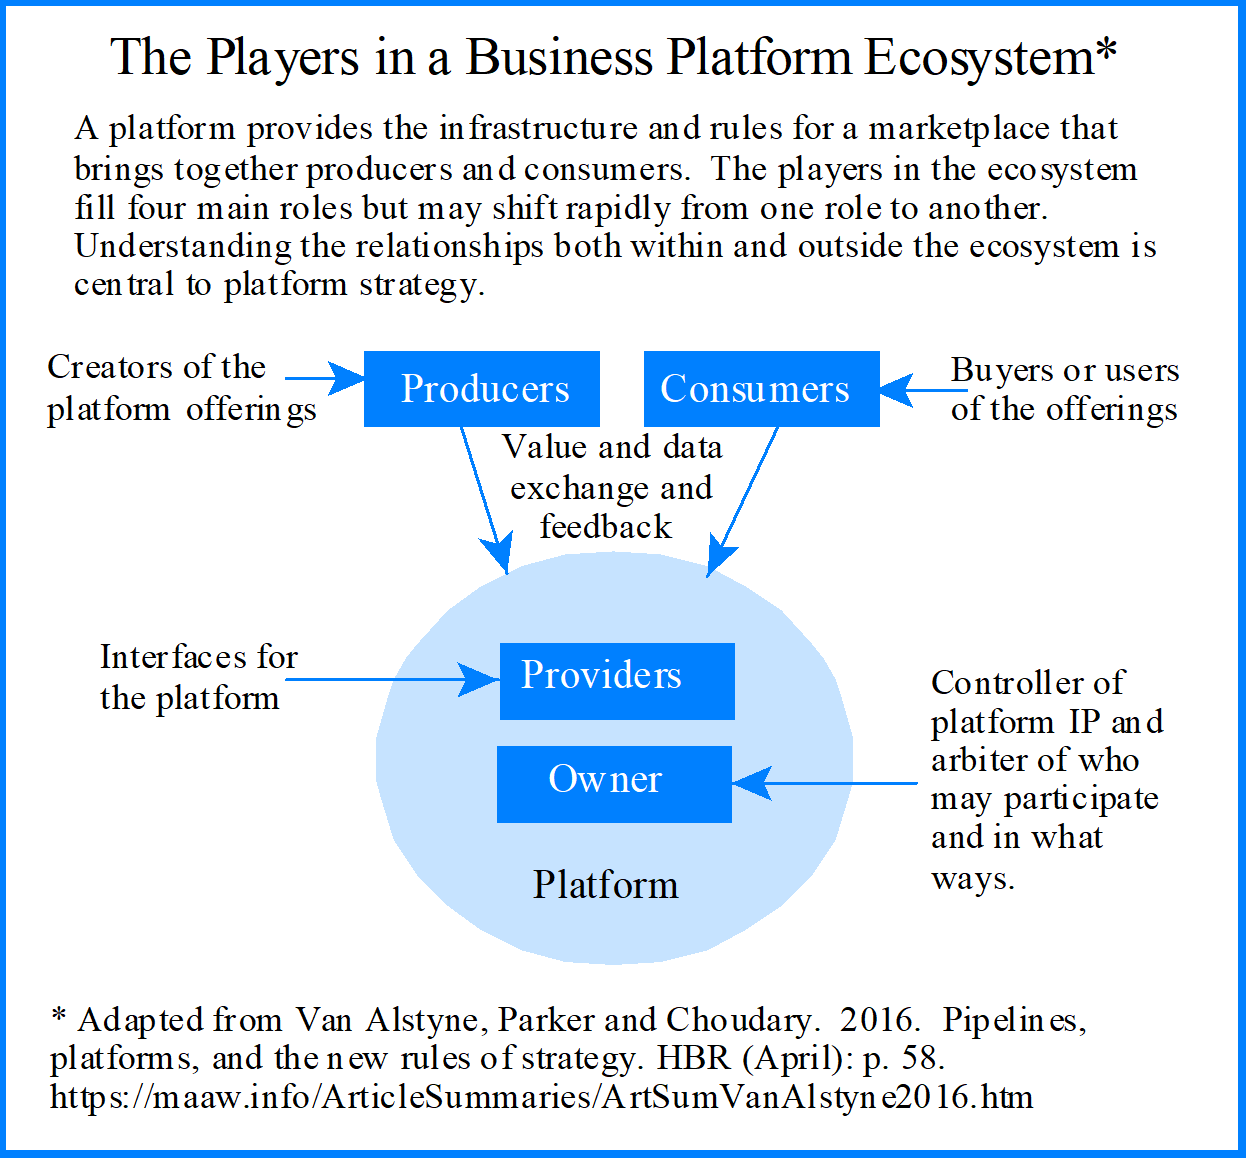 The Players in a Business Platform Ecosystem